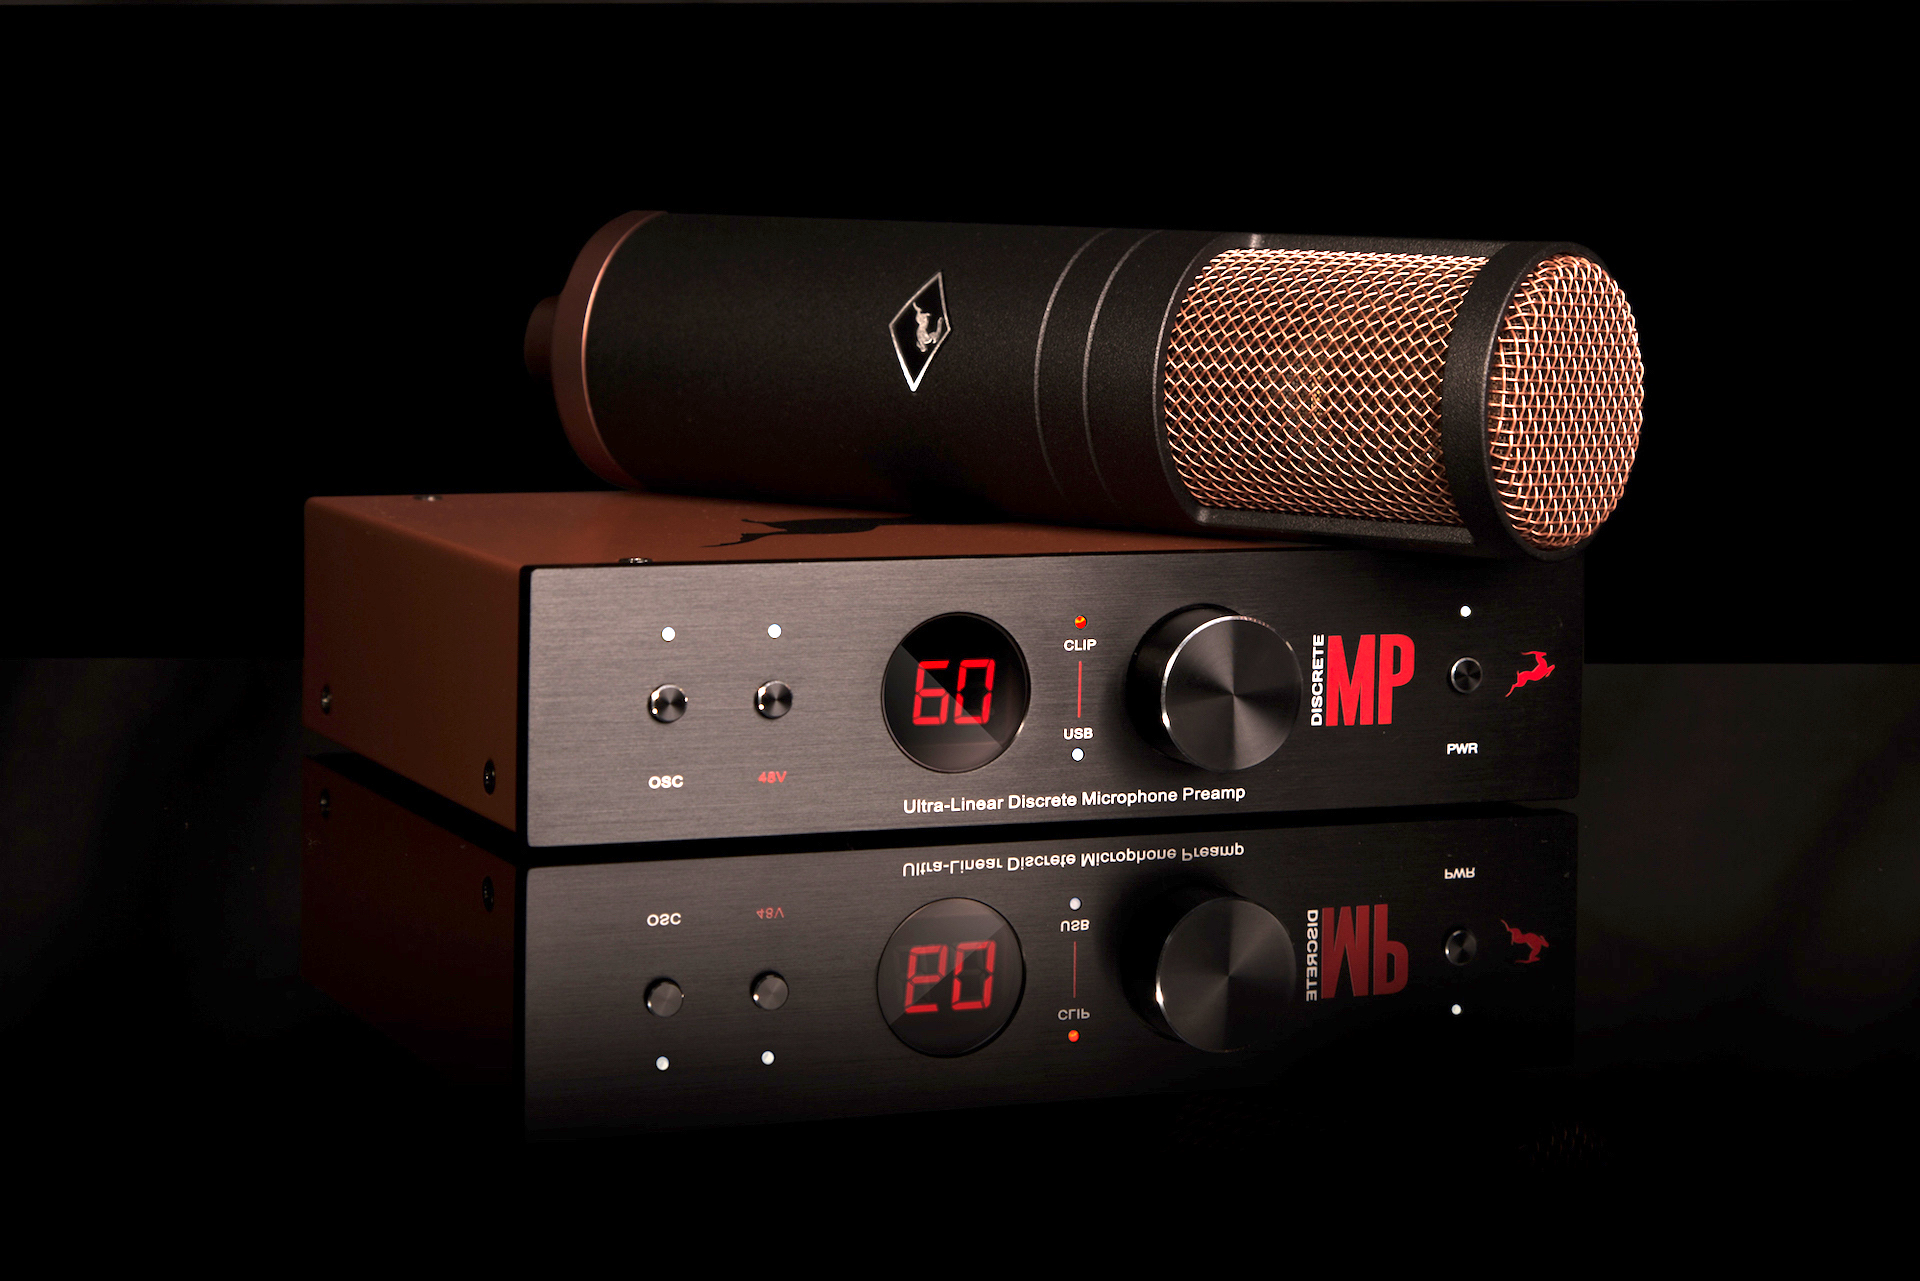 Antelope Audio's Discrete MP preamp and EDGE modeling mic comprise the EDGE Strip